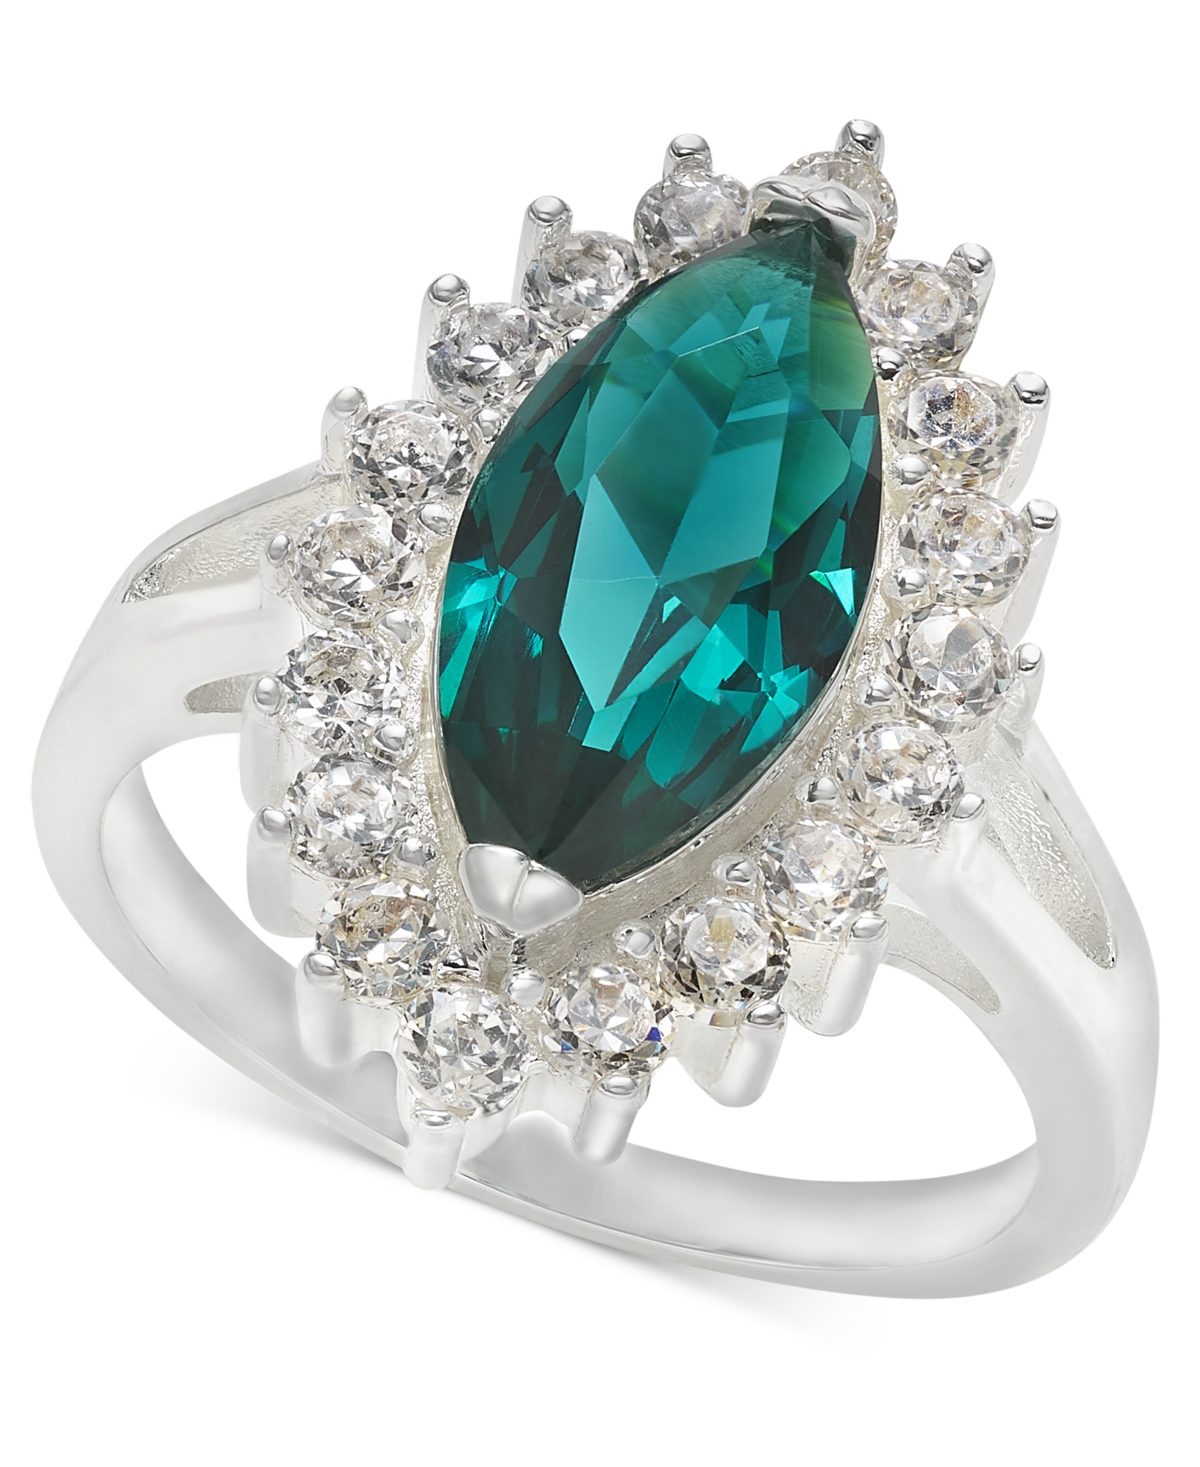 Silver-Tone Green Marquise Crystal Ring, Created for Macy's - Silver